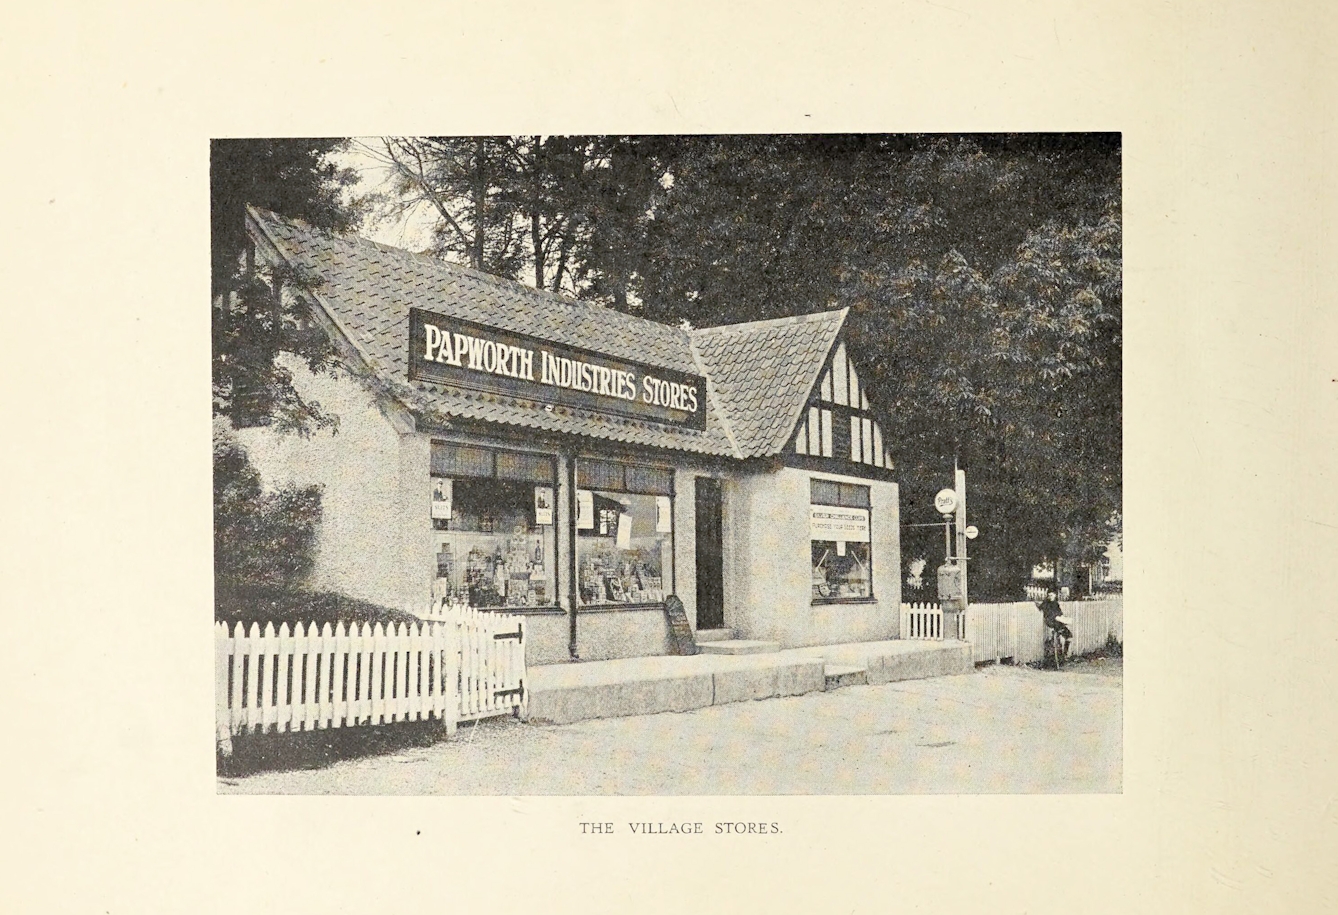 Black and white phtograph of the Papworth Industries Stores, a small village store with white picket fence on either side of it and large trees behind it. A boy on a bicycle leans against the fence to the right of the store.